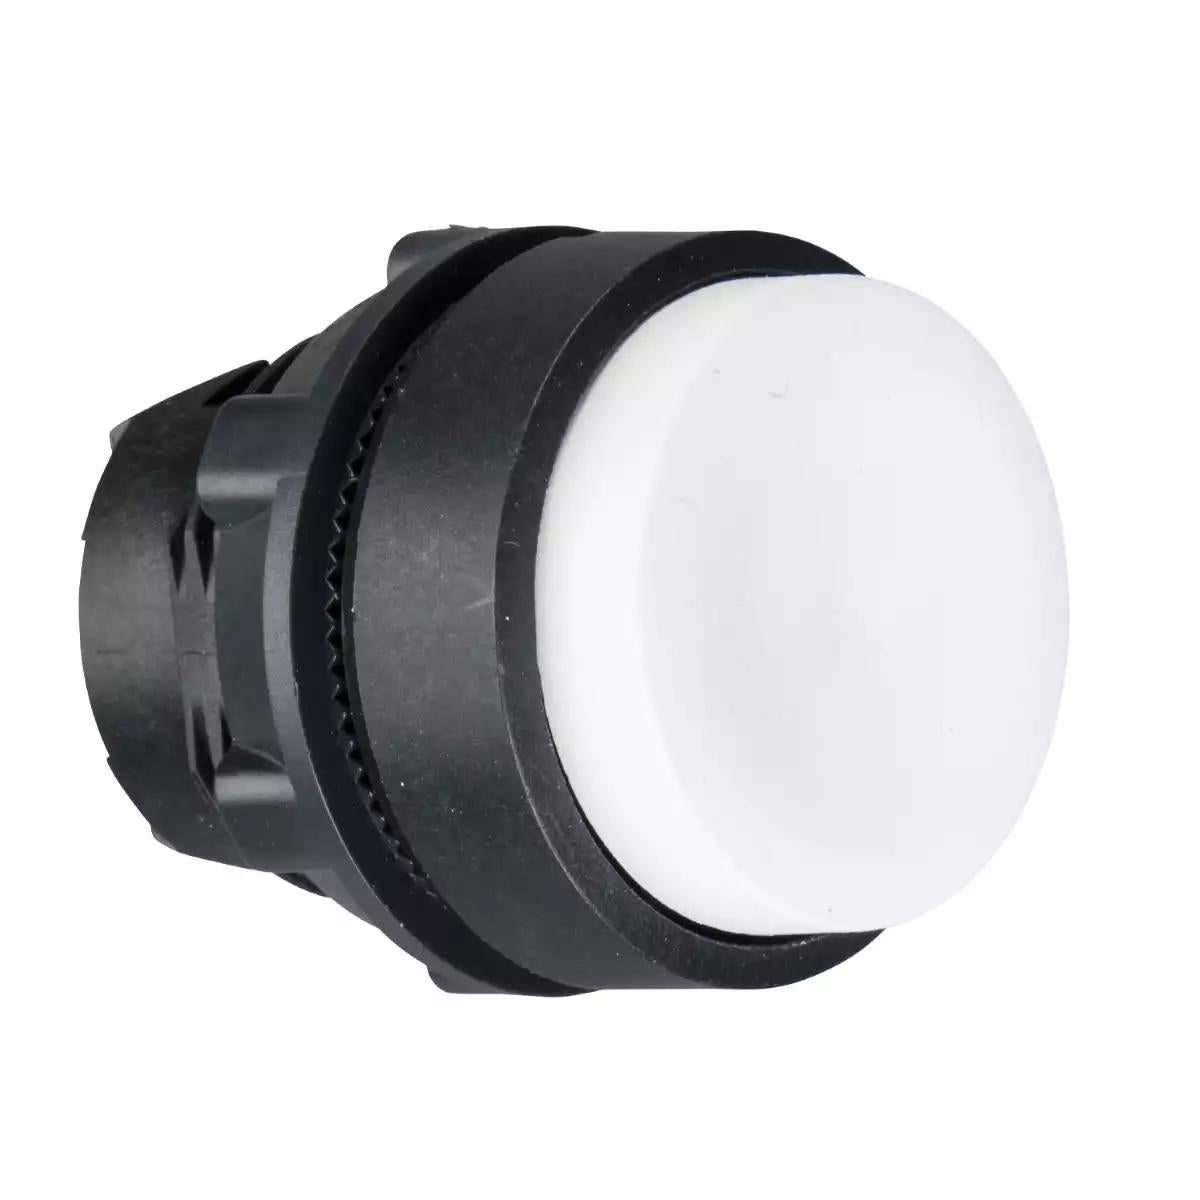 Head for non illuminated push button, Harmony XB5, XB4, white projecting pushbutton Ø22 mm unmarked